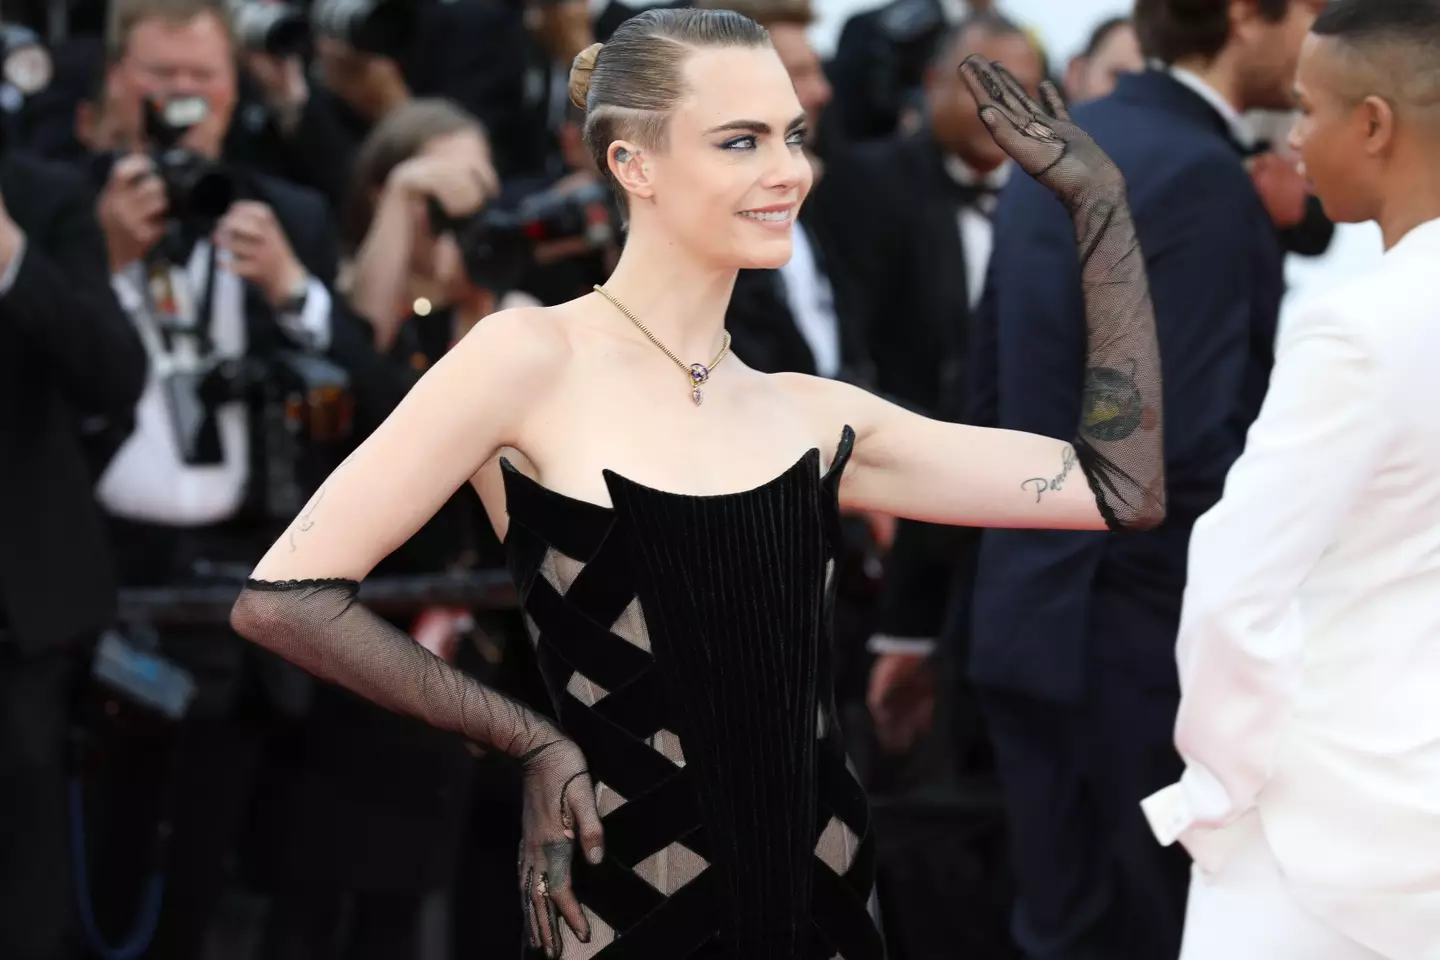 Delevingne admitted she previously struggled reaching out for help.